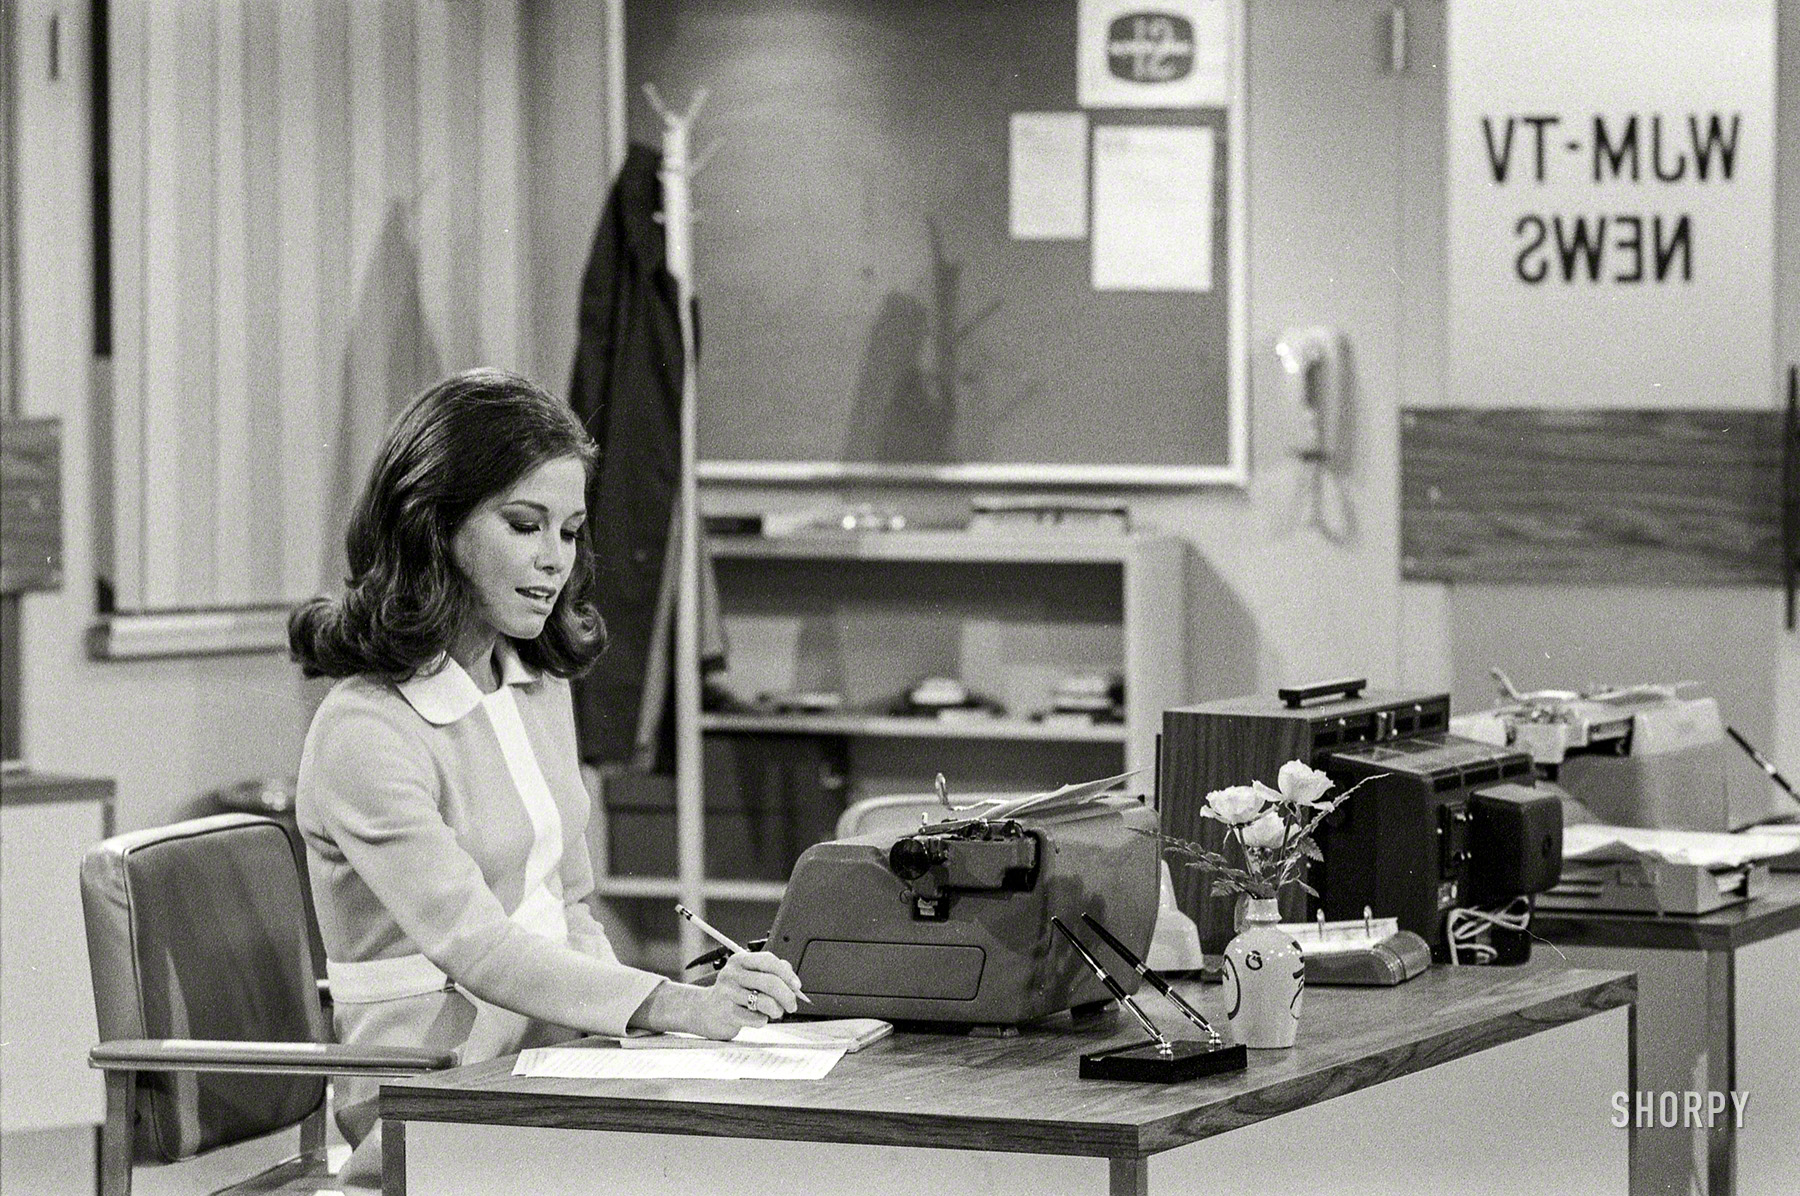 Mary Tyler Moore, Who Incarnated
The Modern Woman on TV, Is Dead
&nbsp; &nbsp; &nbsp; &nbsp; The actress, whose witty and graceful performances on two top-rated television shows in the 1960s and ’70s helped define a new vision of American womanhood, died on Wednesday in Greenwich, Conn. She had recently turned 80. -- New York Times

Los Angeles, November 1970. "Mary Tyler Moore rehearsing and performing on the set of the Mary Tyler Moore Show." 35mm negative by Douglas Jones for Look magazine. View full size.